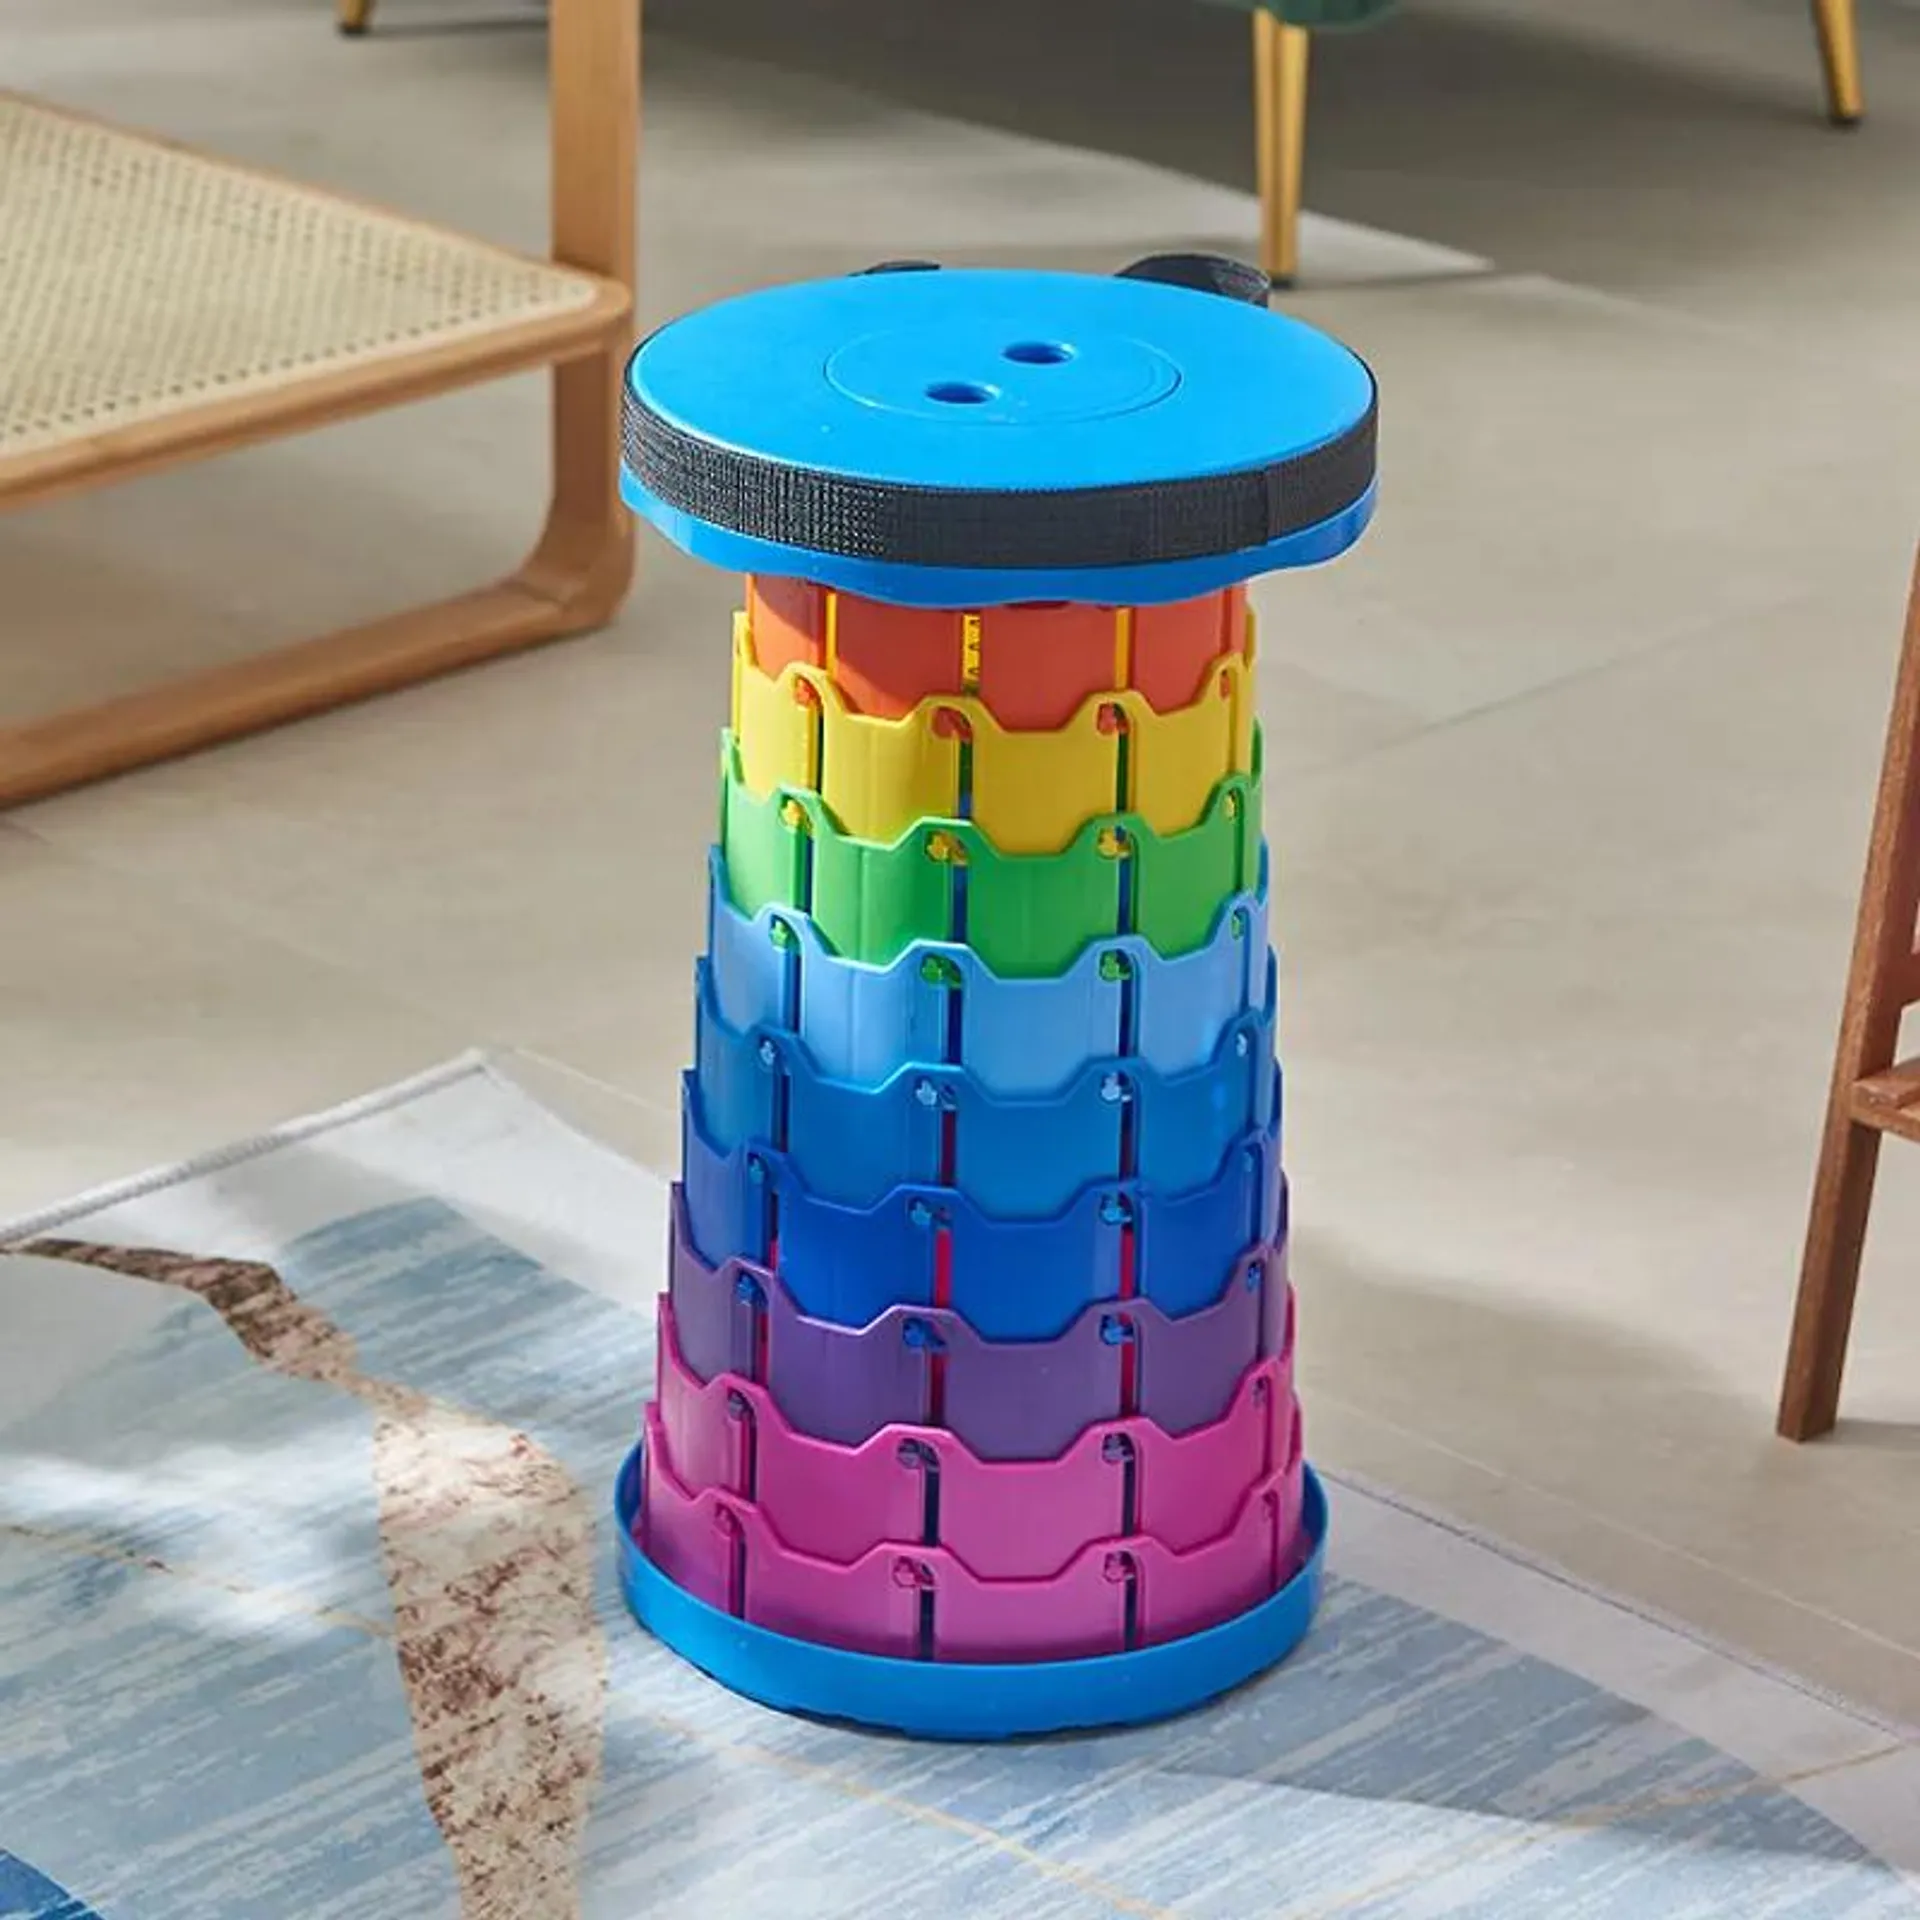 Folding Telescopic Stool Portable Lightweight Thickened Plastic Stools Household Round Stable Structure Chair Lounge Furniture